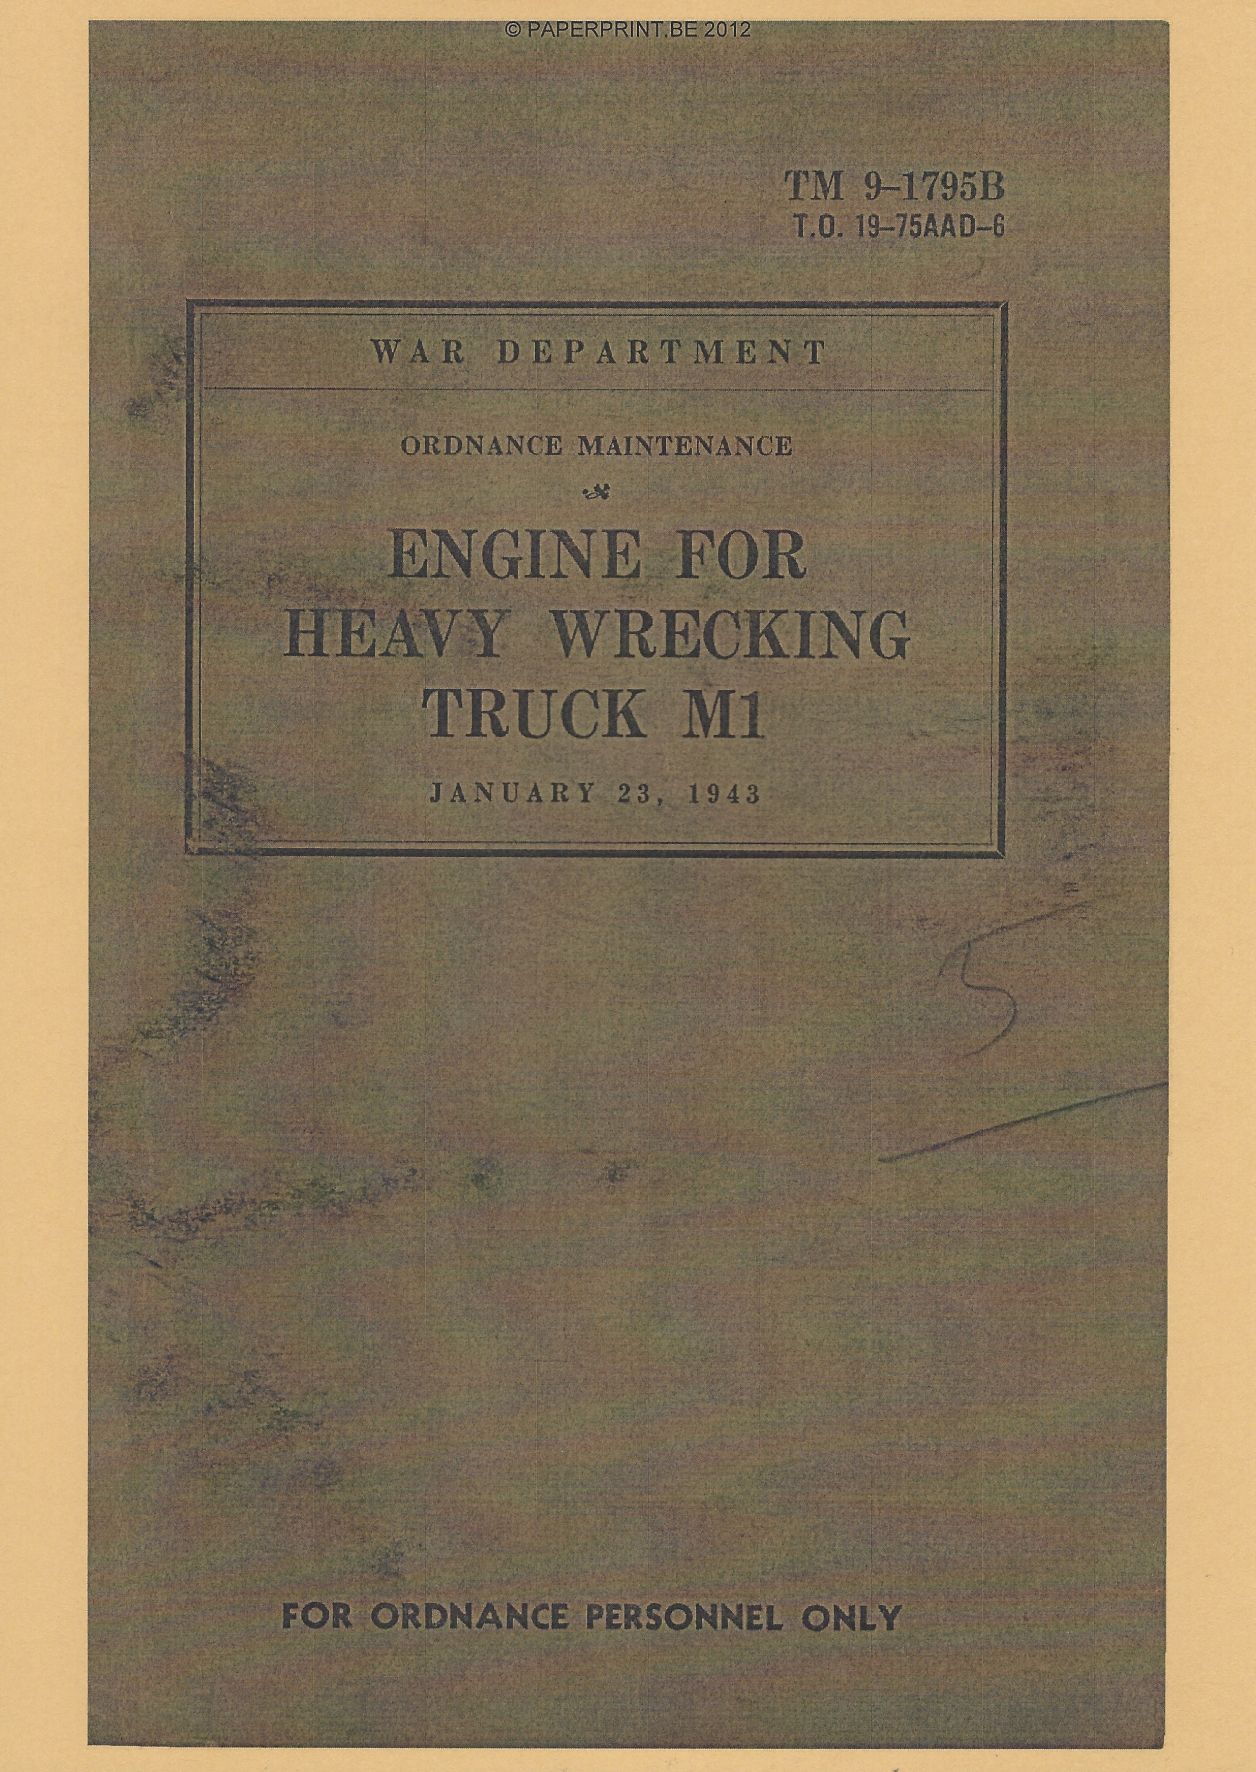 TM 9-1795B US ENGINE FOR HEAVY WRECKING TRUCK M1